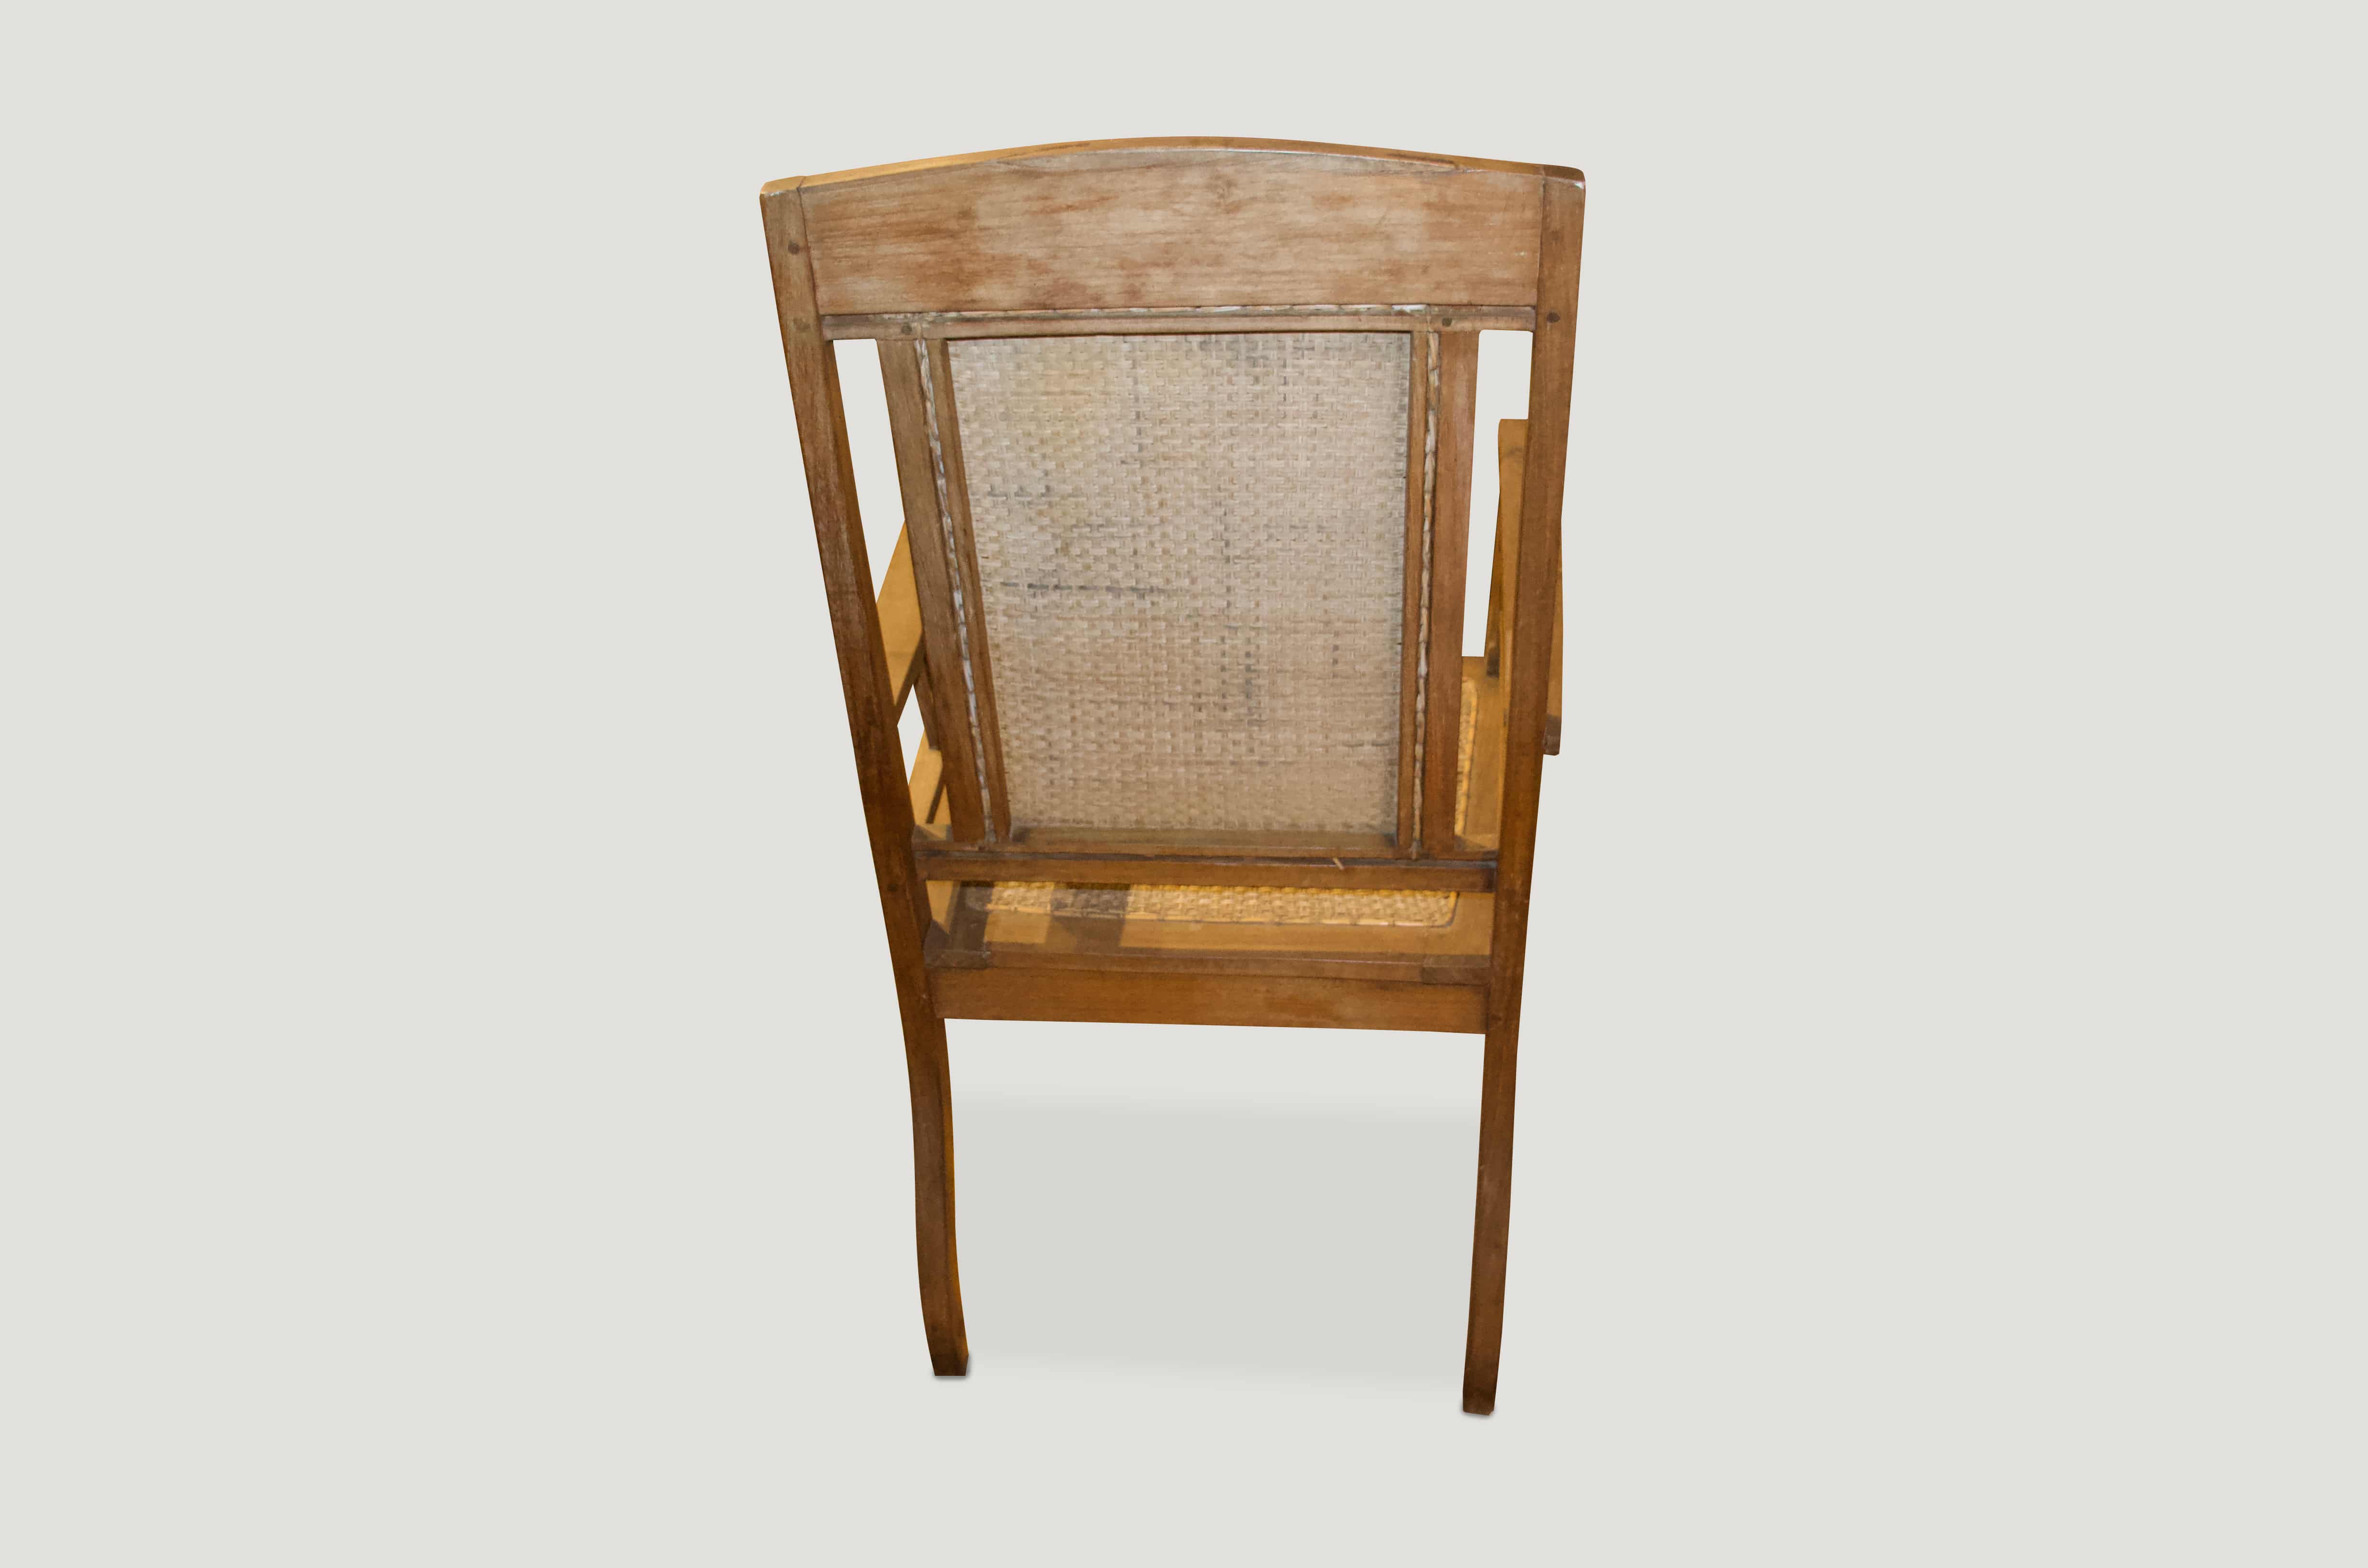 Antique Colonial teak chair with hand-woven rattan